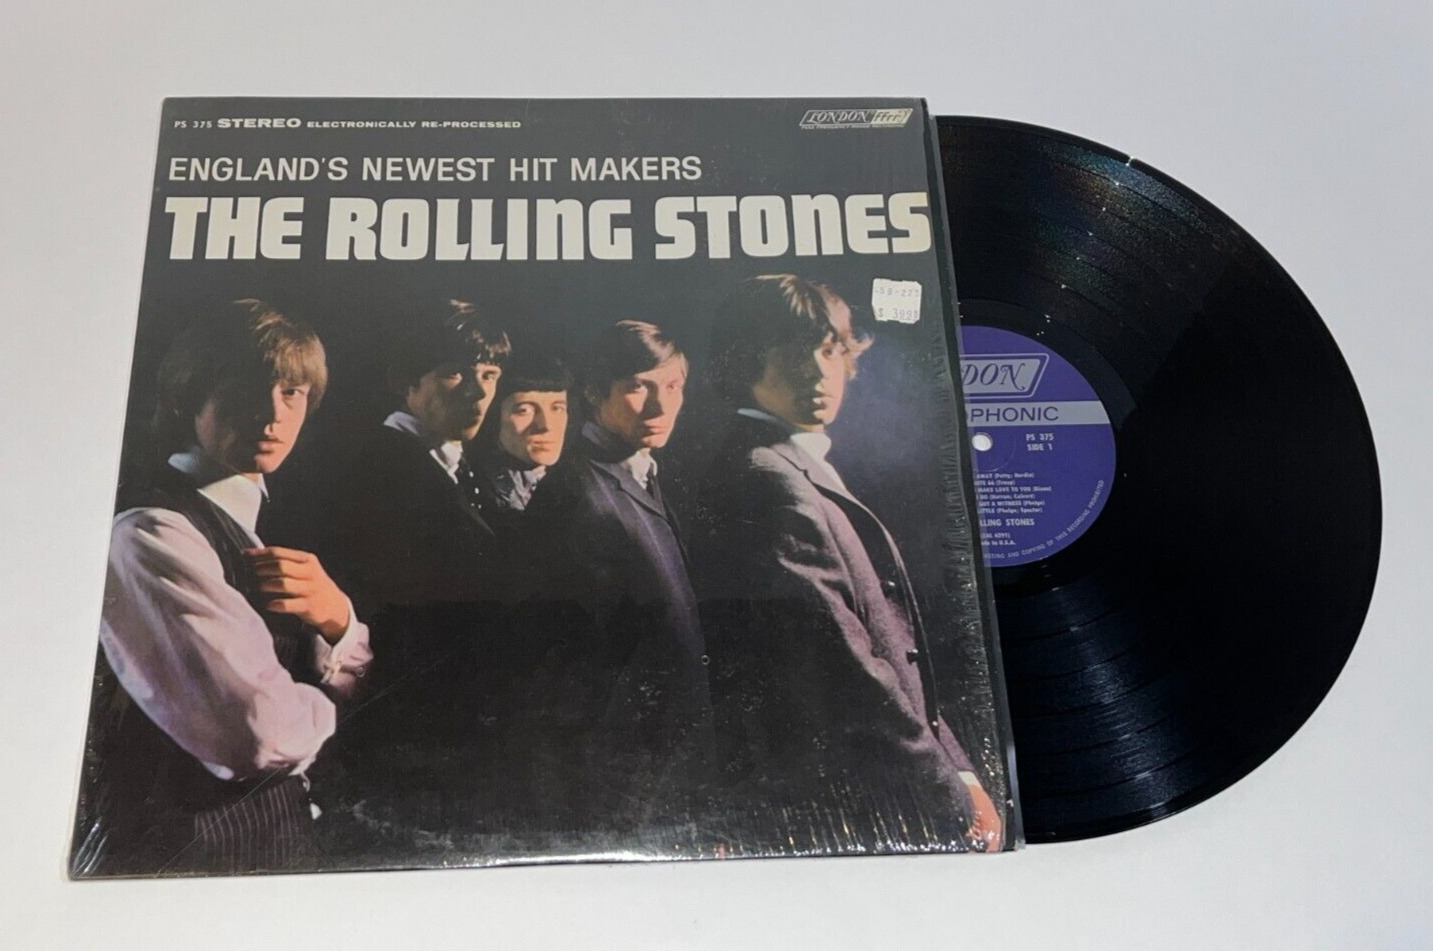 The Rolling Stones England's Newest Hit Makers Vinyl LP 1969 Stereo in shrink